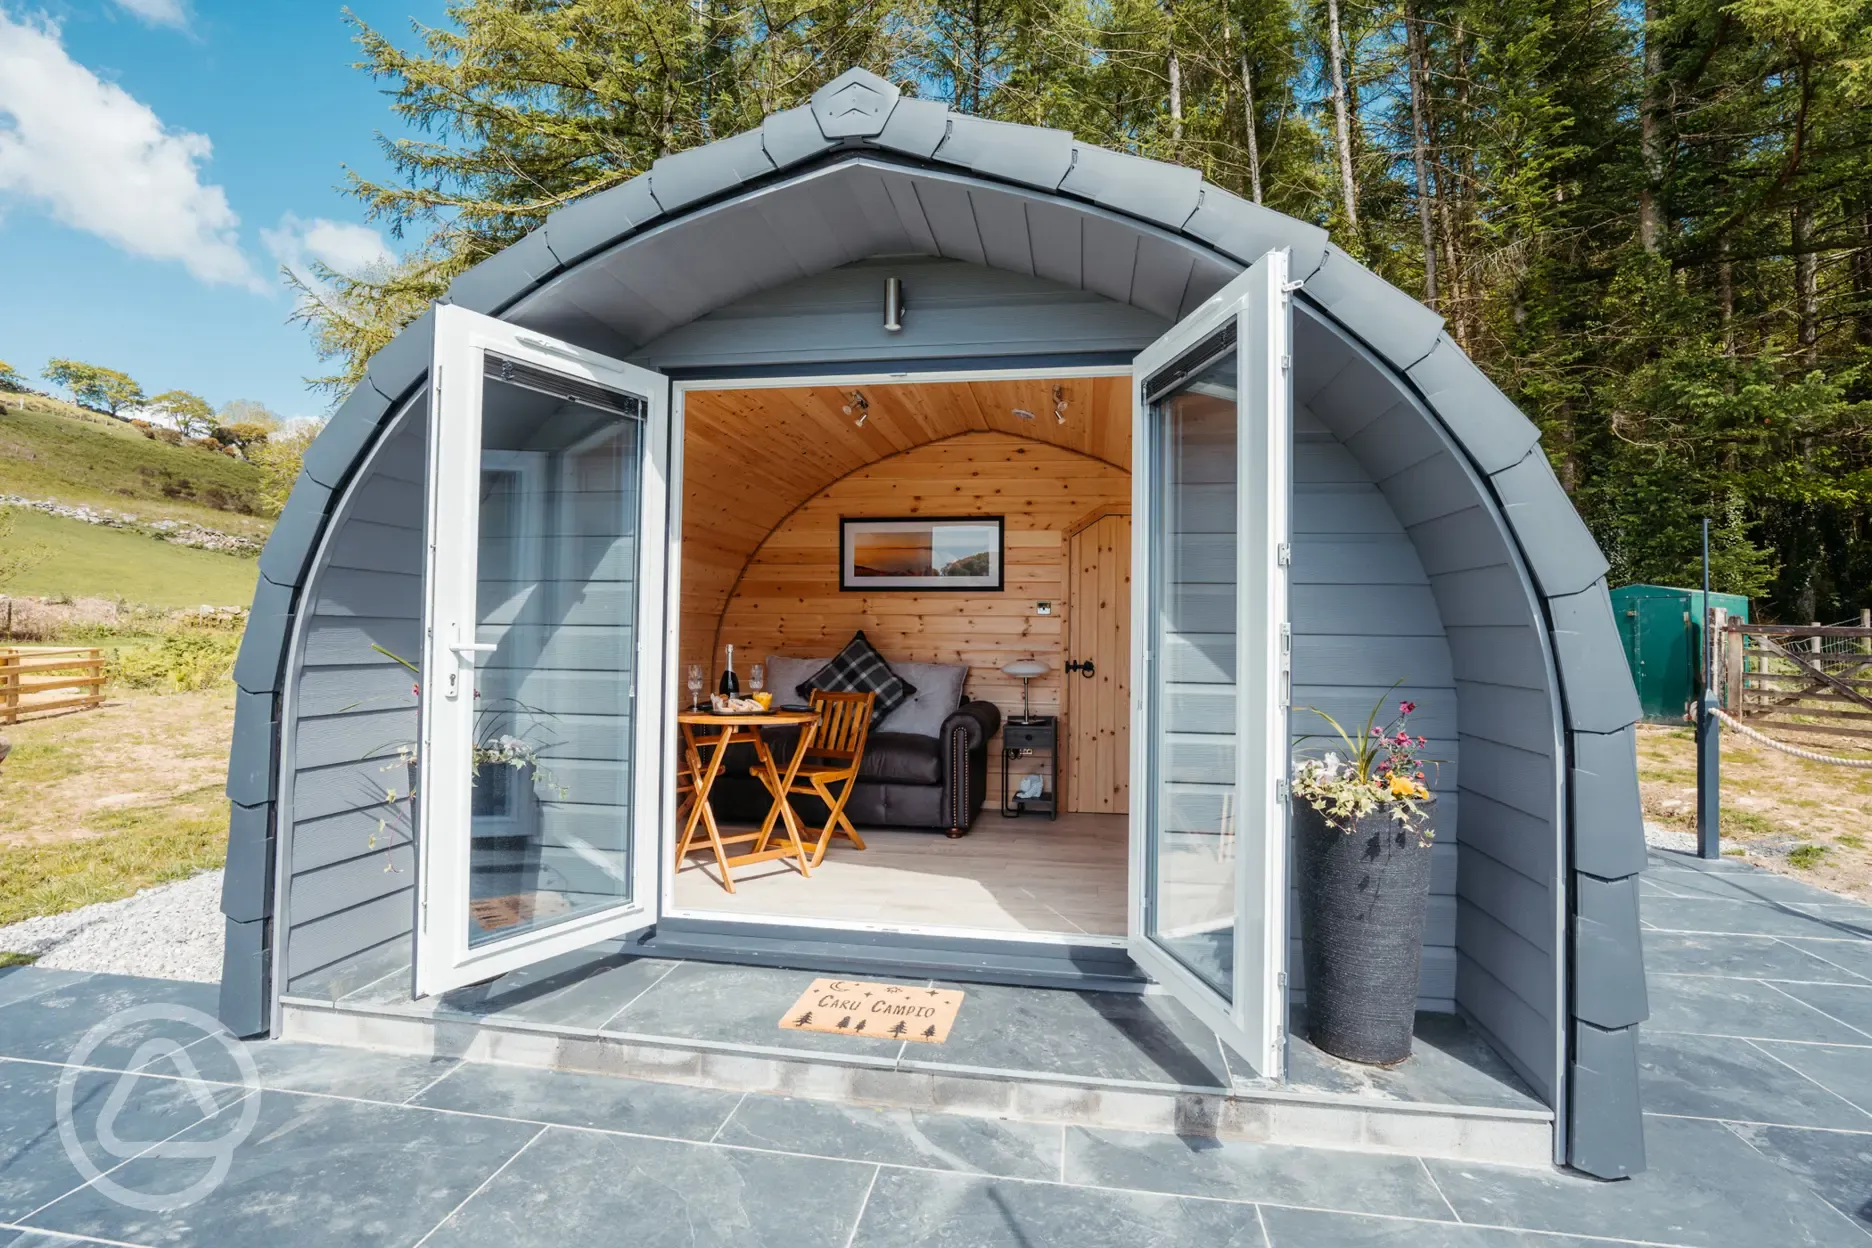 Luxury ensuite glamping pods